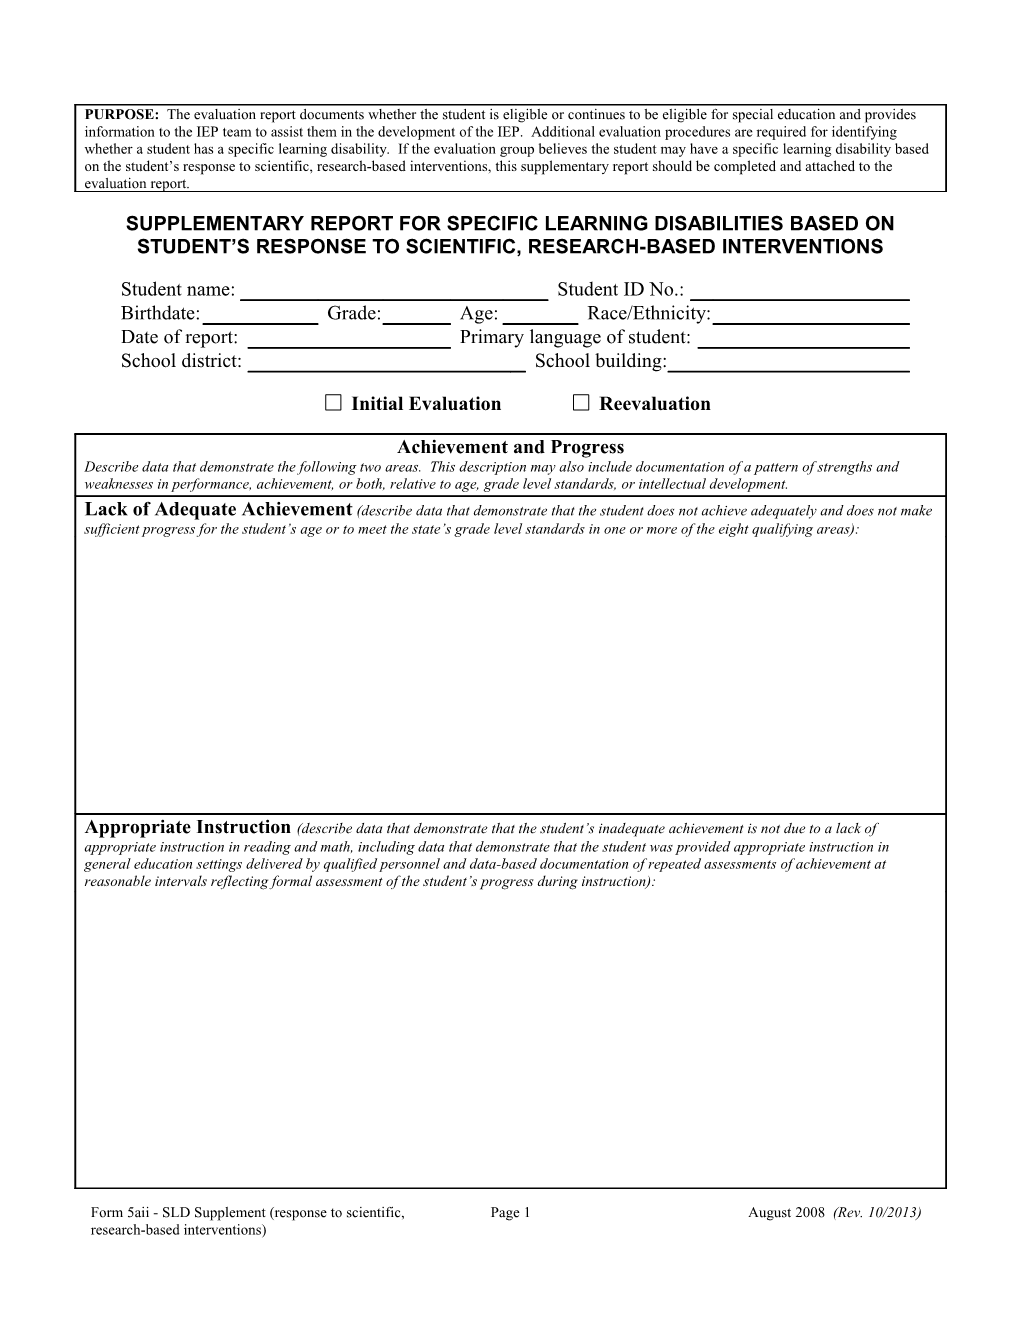 Supplementary Report for Specific Learning Disabilities Based on Student's Response To